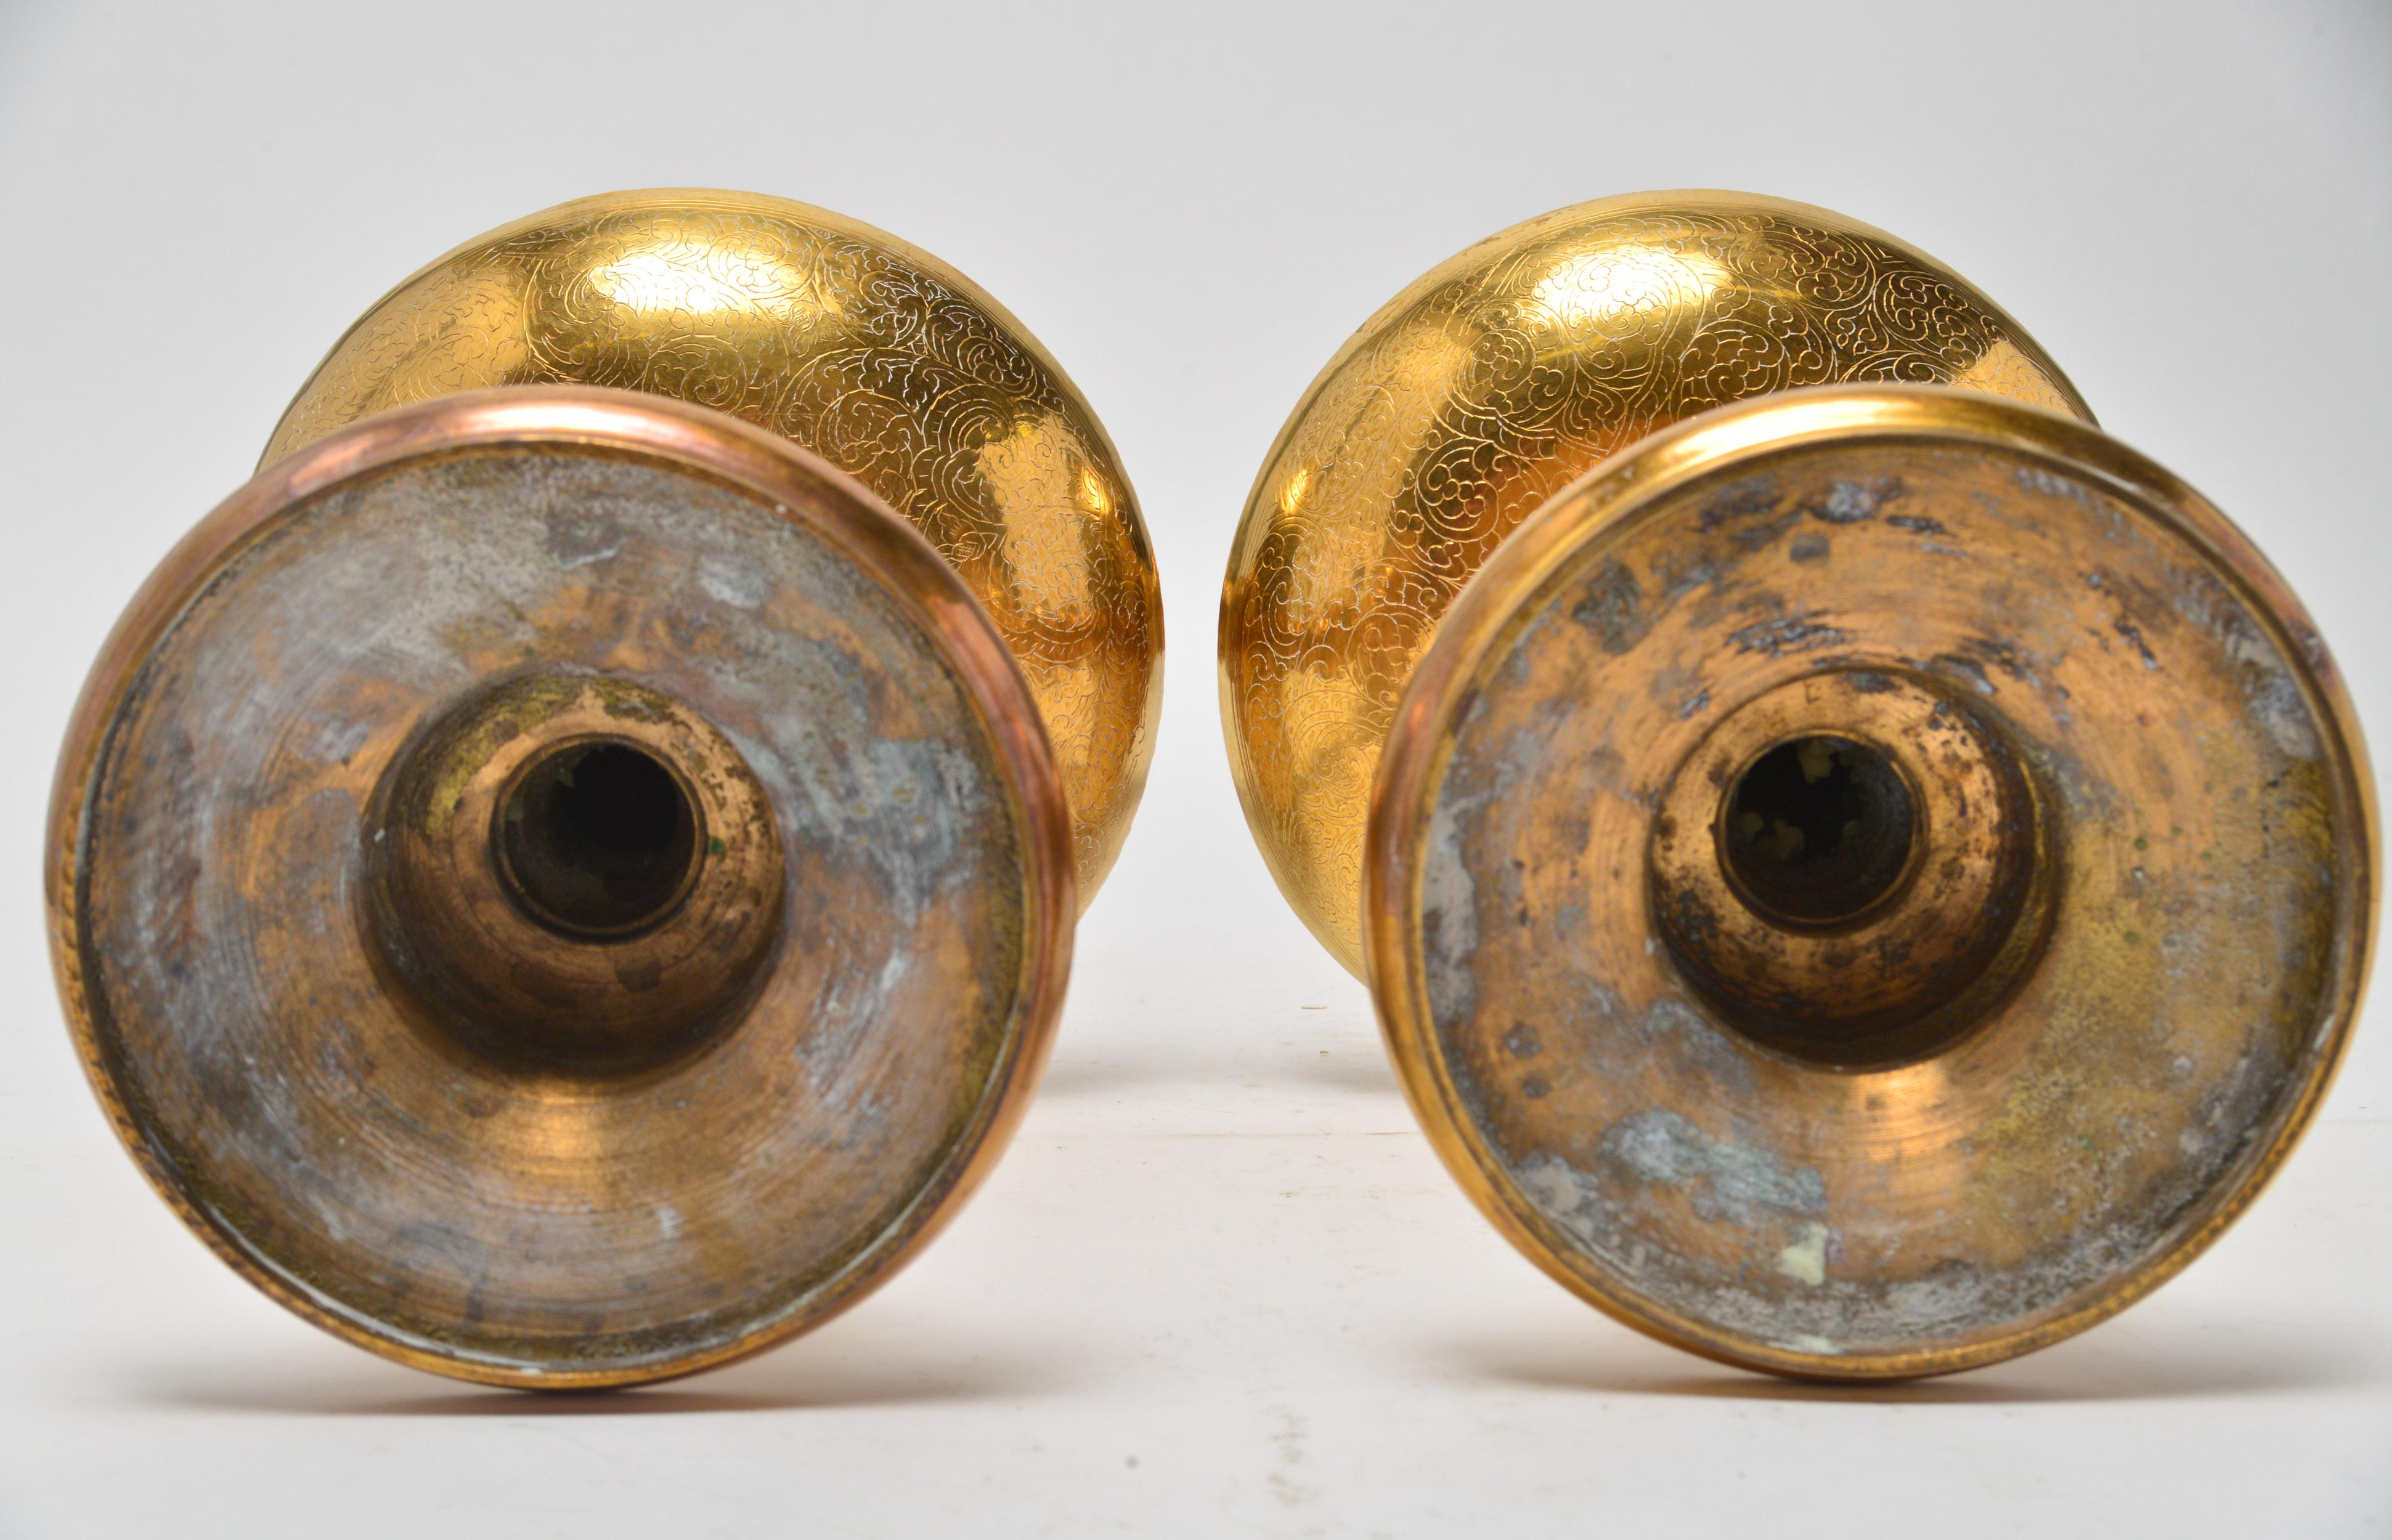 20th Century Indian Candlesticks in Engraved Brass